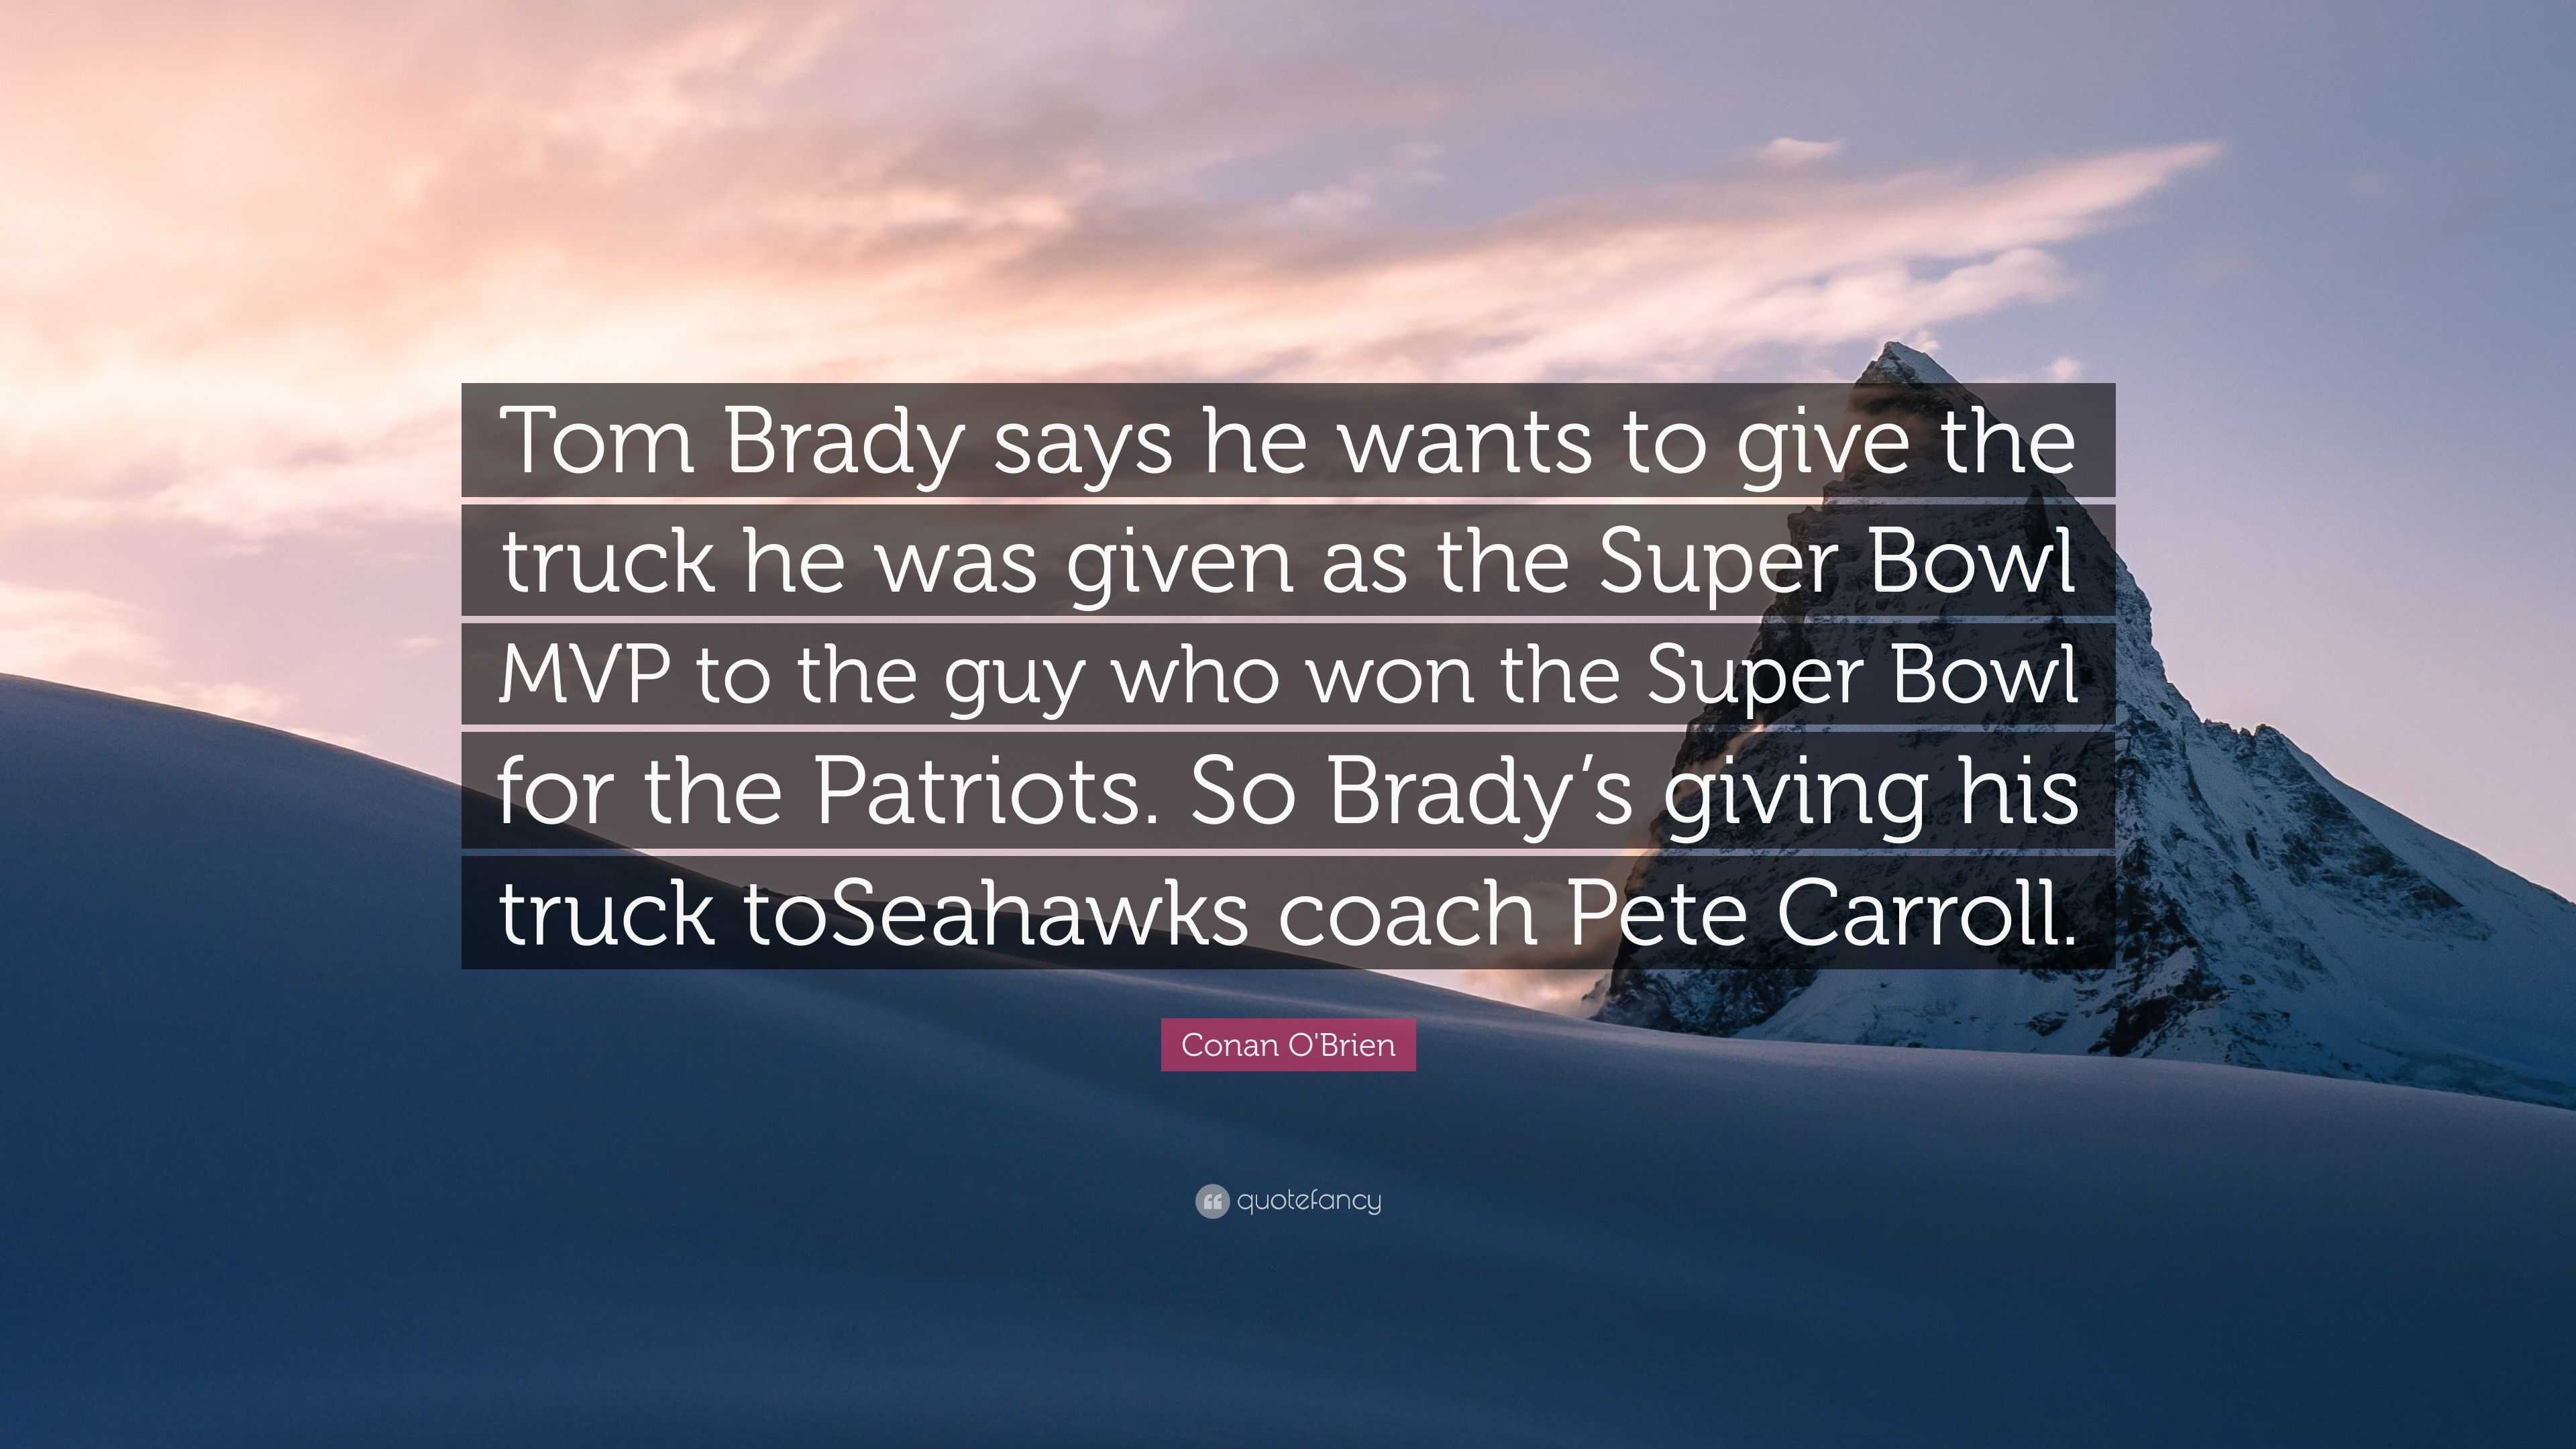 Who is Tom Brady giving his Super Bowl truck to? 